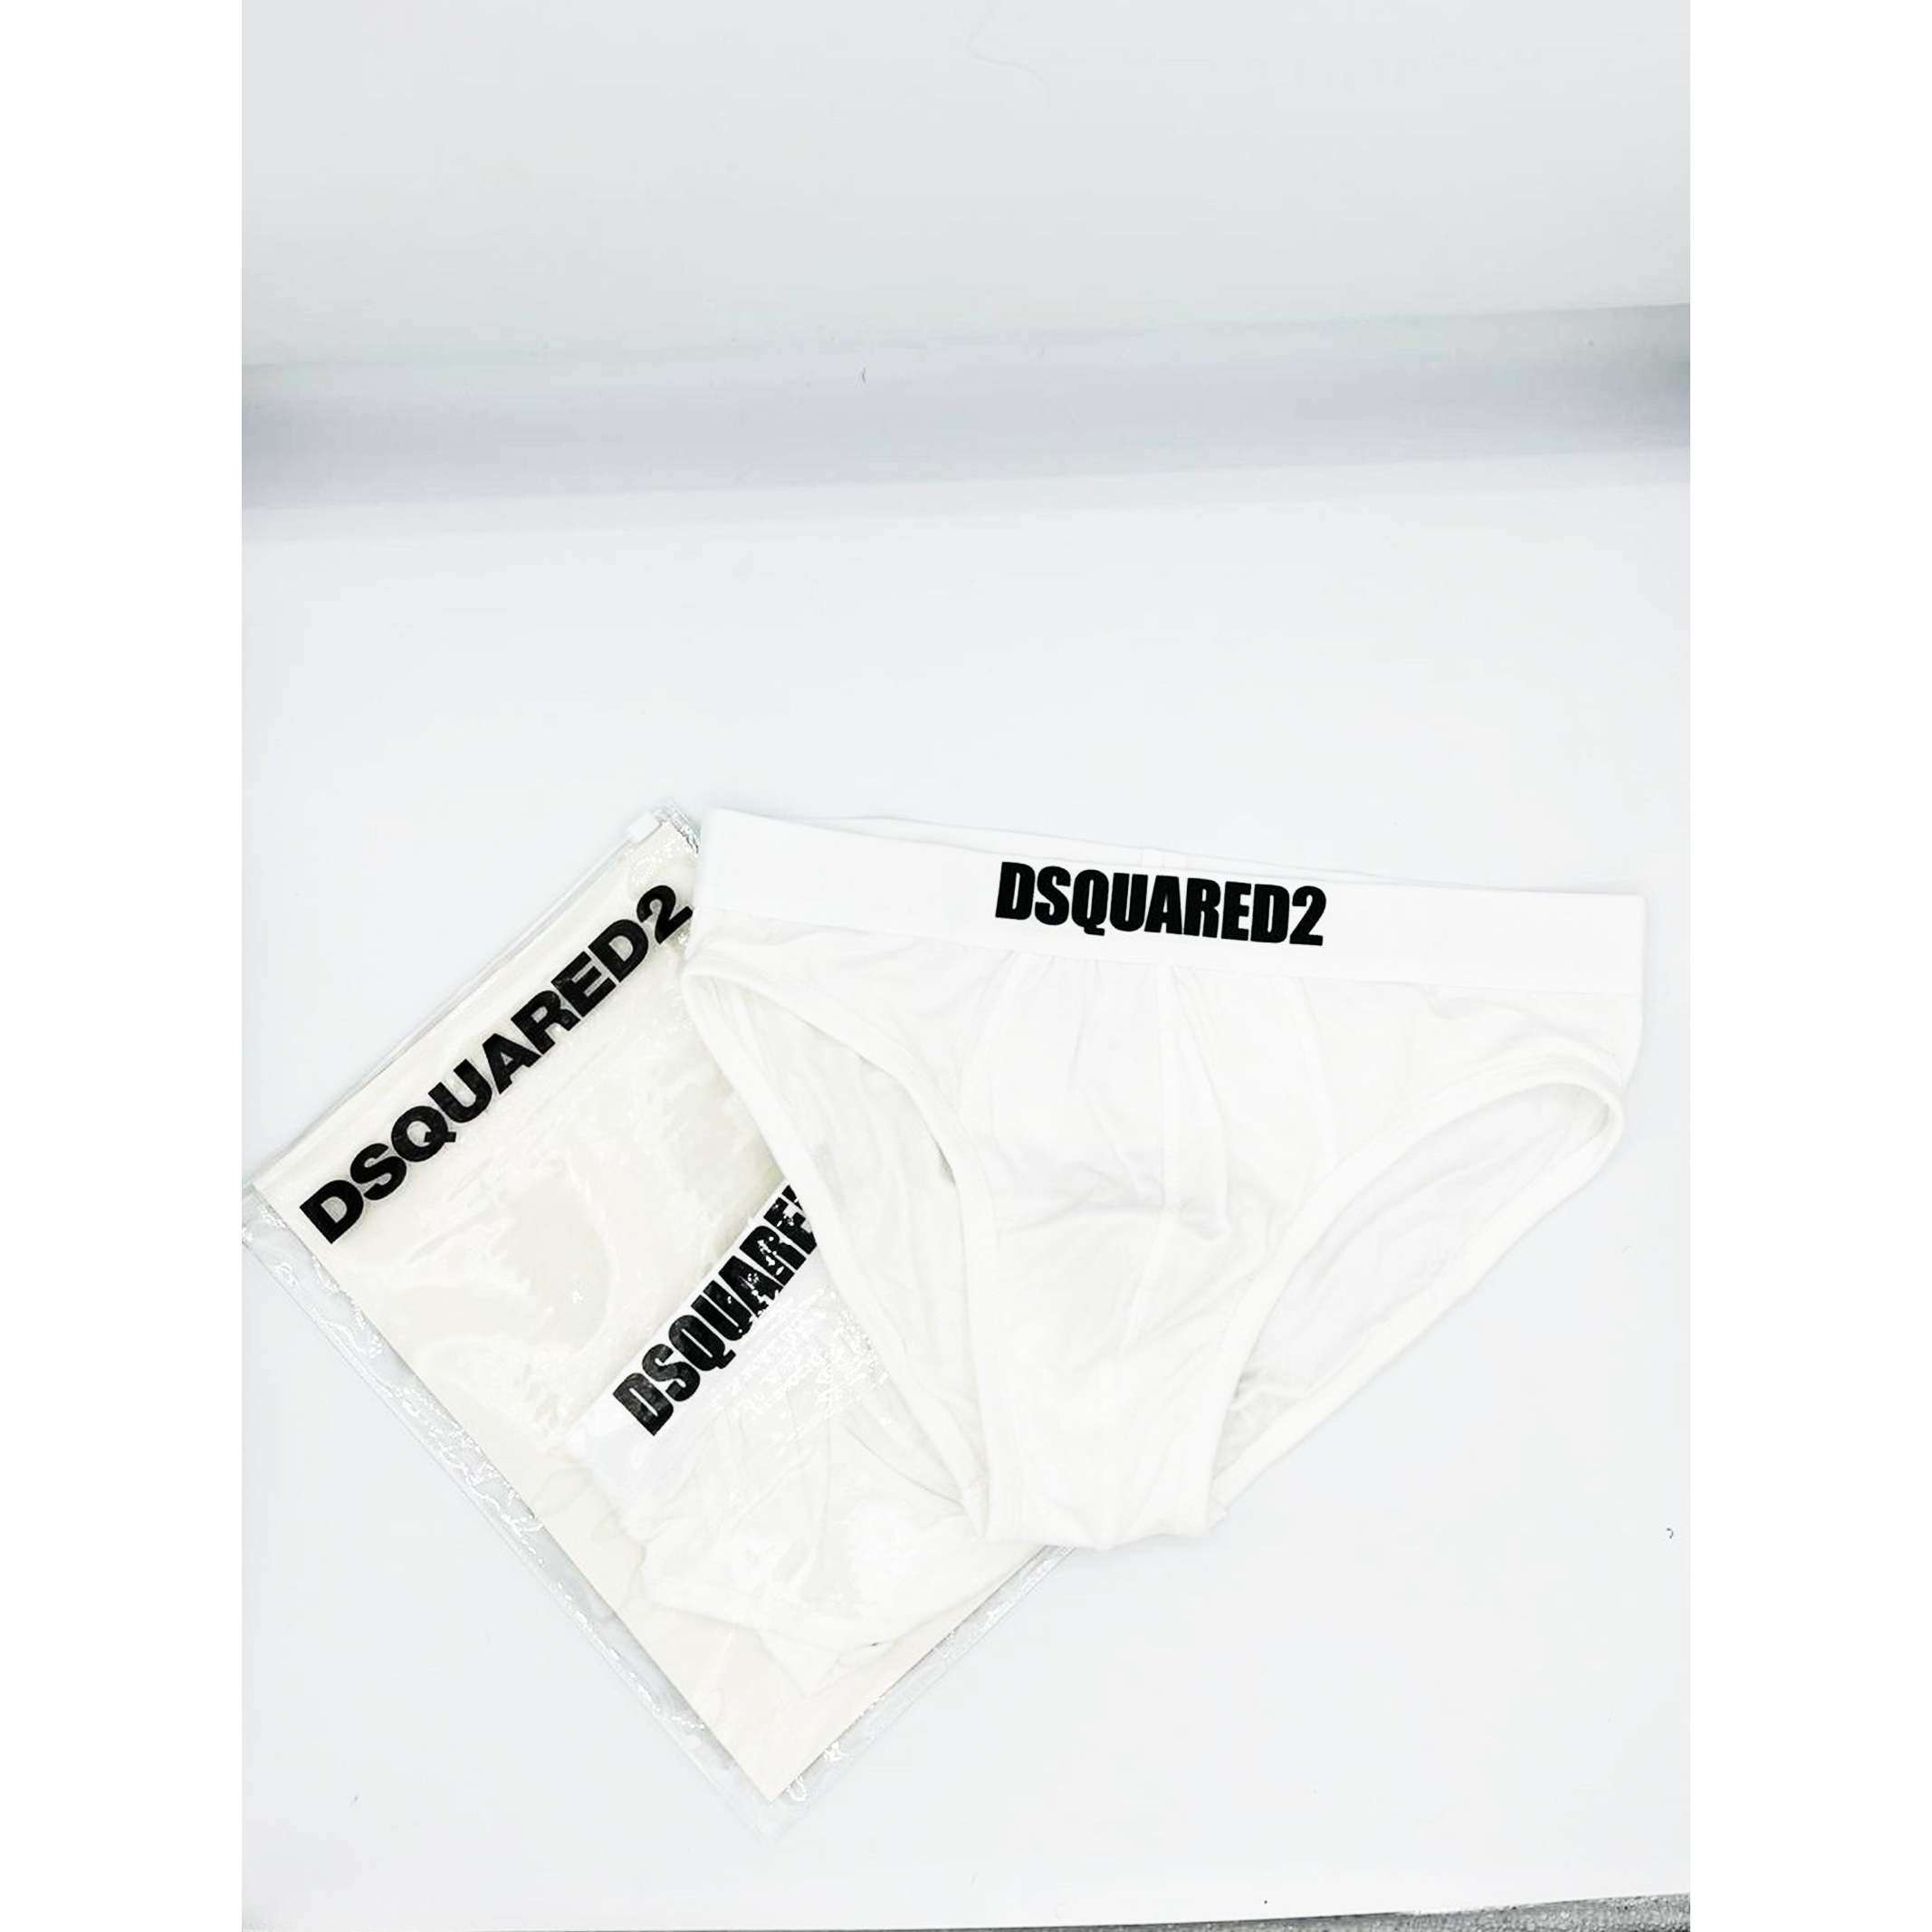 Dsquared2 Uomo Slip Twin Pack D9X614530